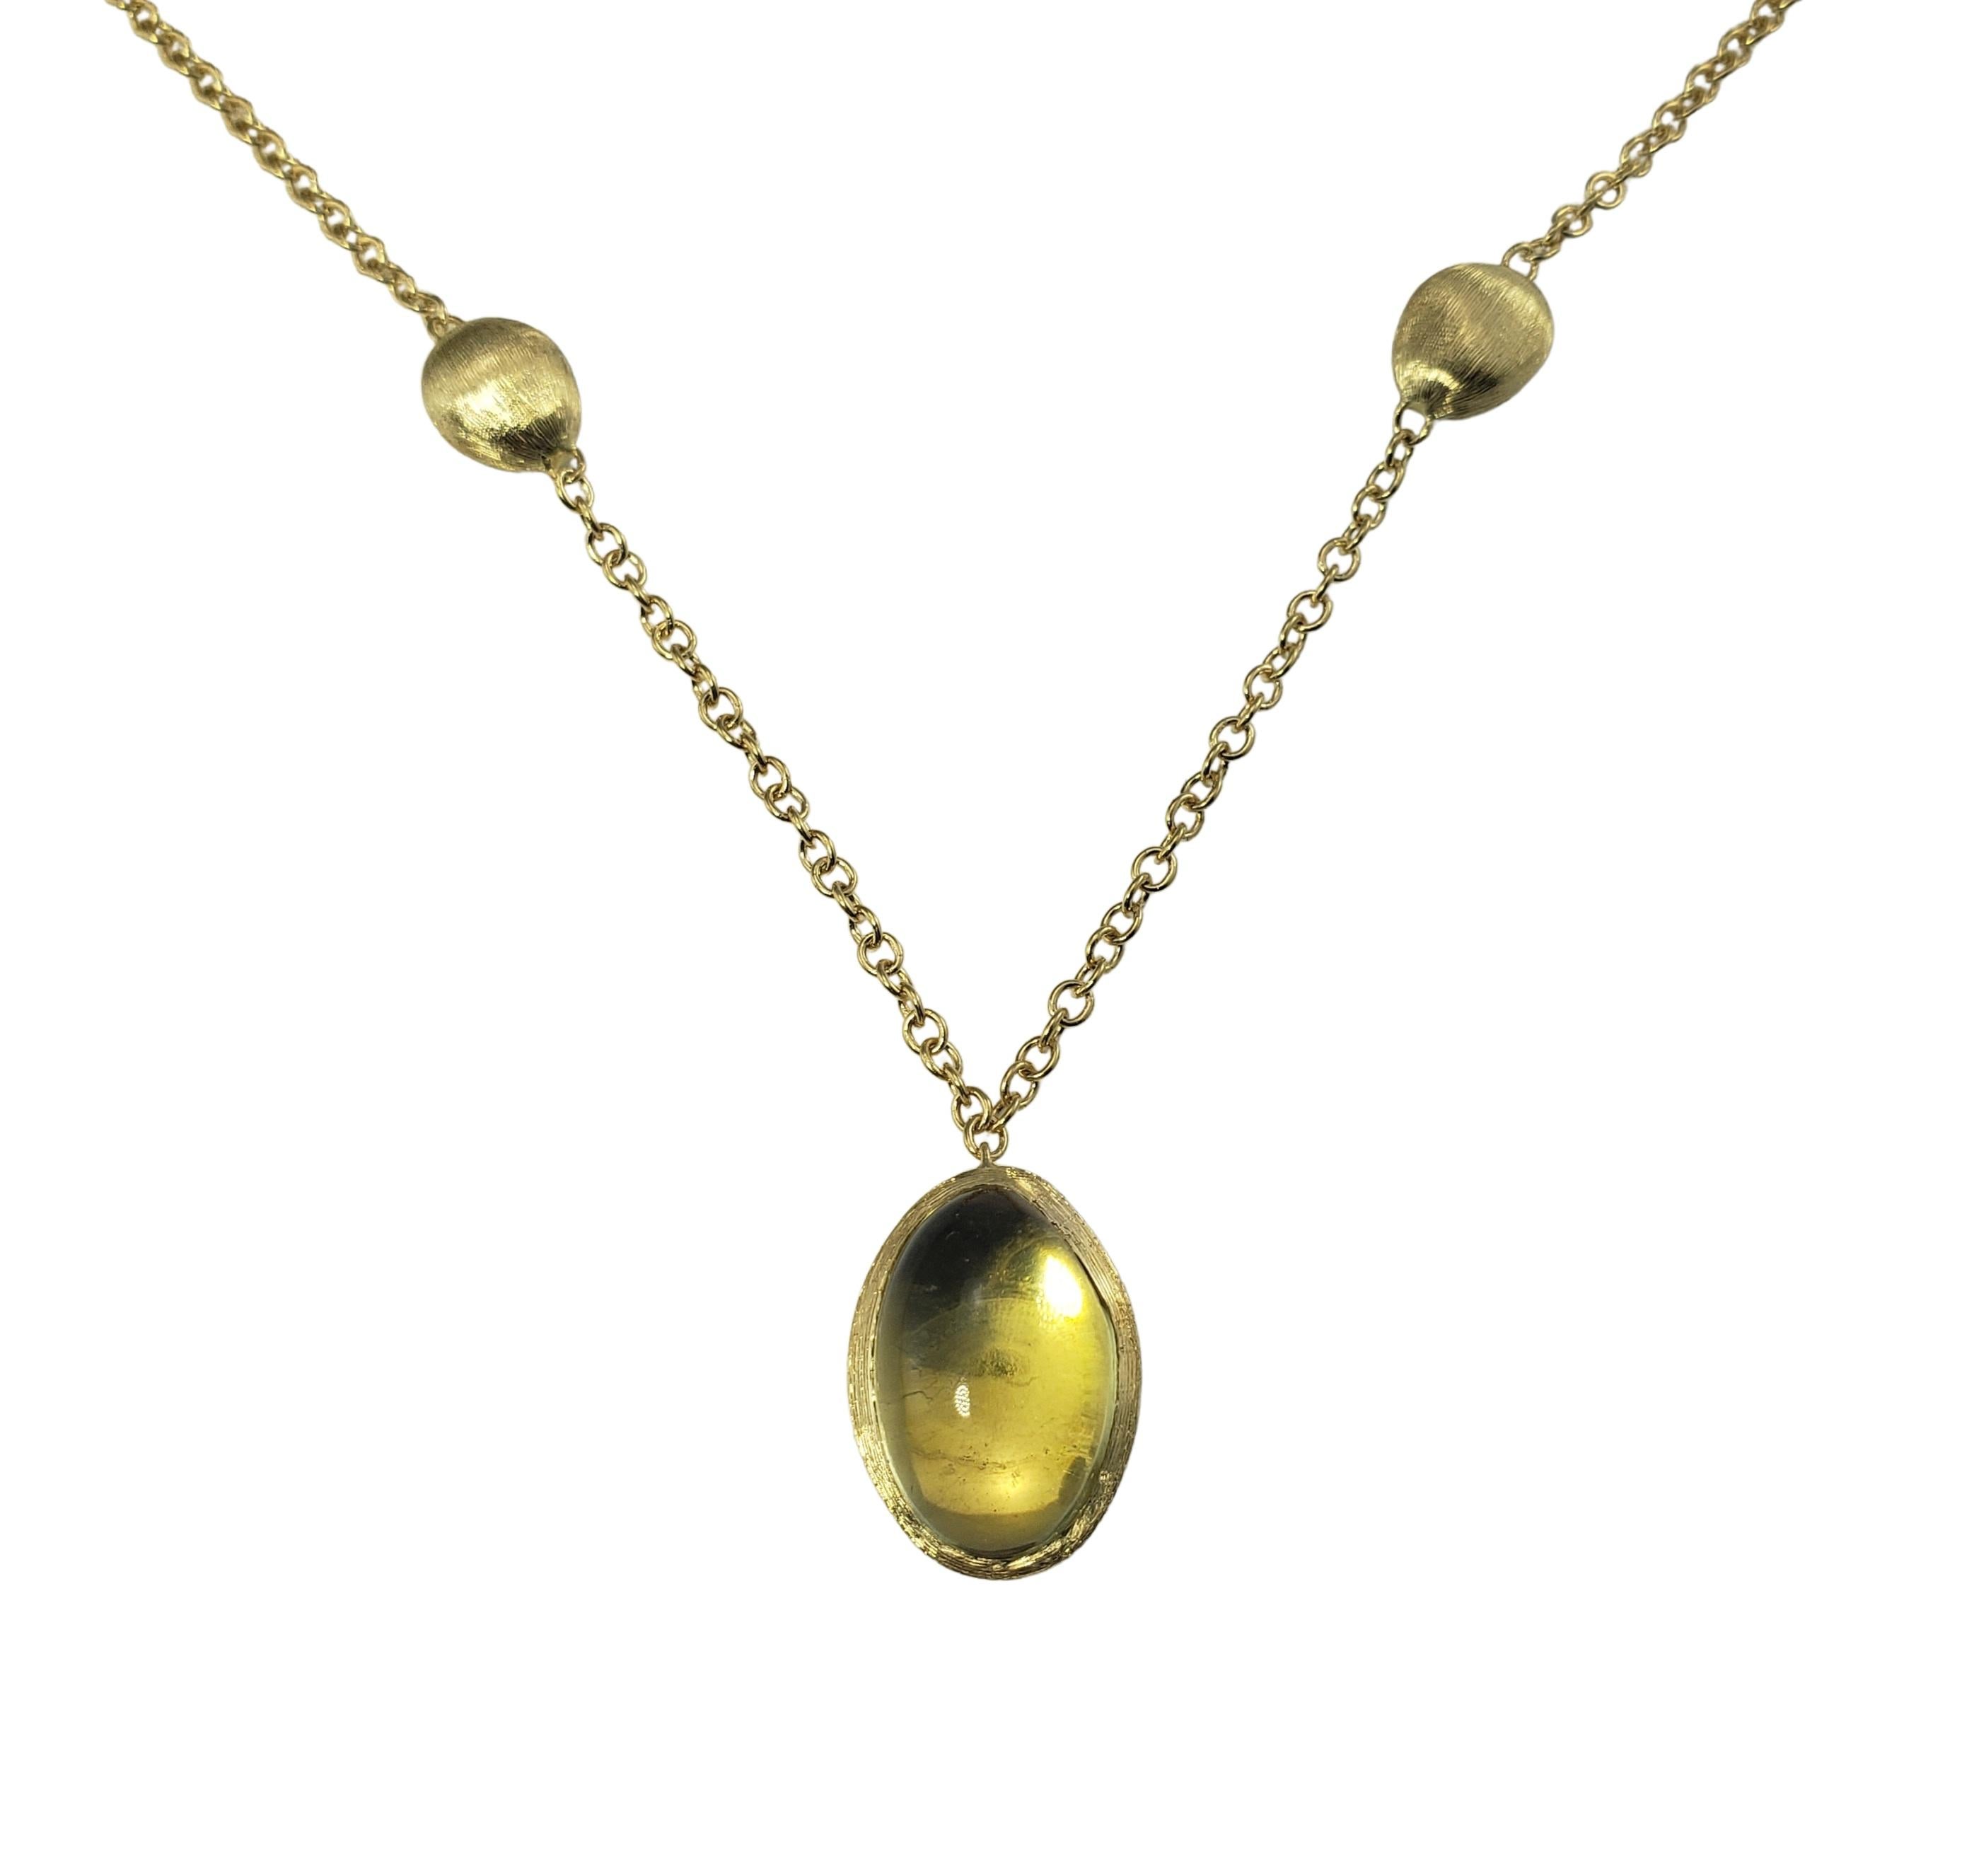 Marco Bicego 18 Karat Yellow Gold and Citrine Necklace-

This stunning necklace by Marco Bicego features one oval citrine (12 mm x 10 mm) and beautifully detailed 18K yellow gold.

Size: 15.5 inches

Weight:  5.8 dwt. /  9.1 gr.

Hallmark:  Marco